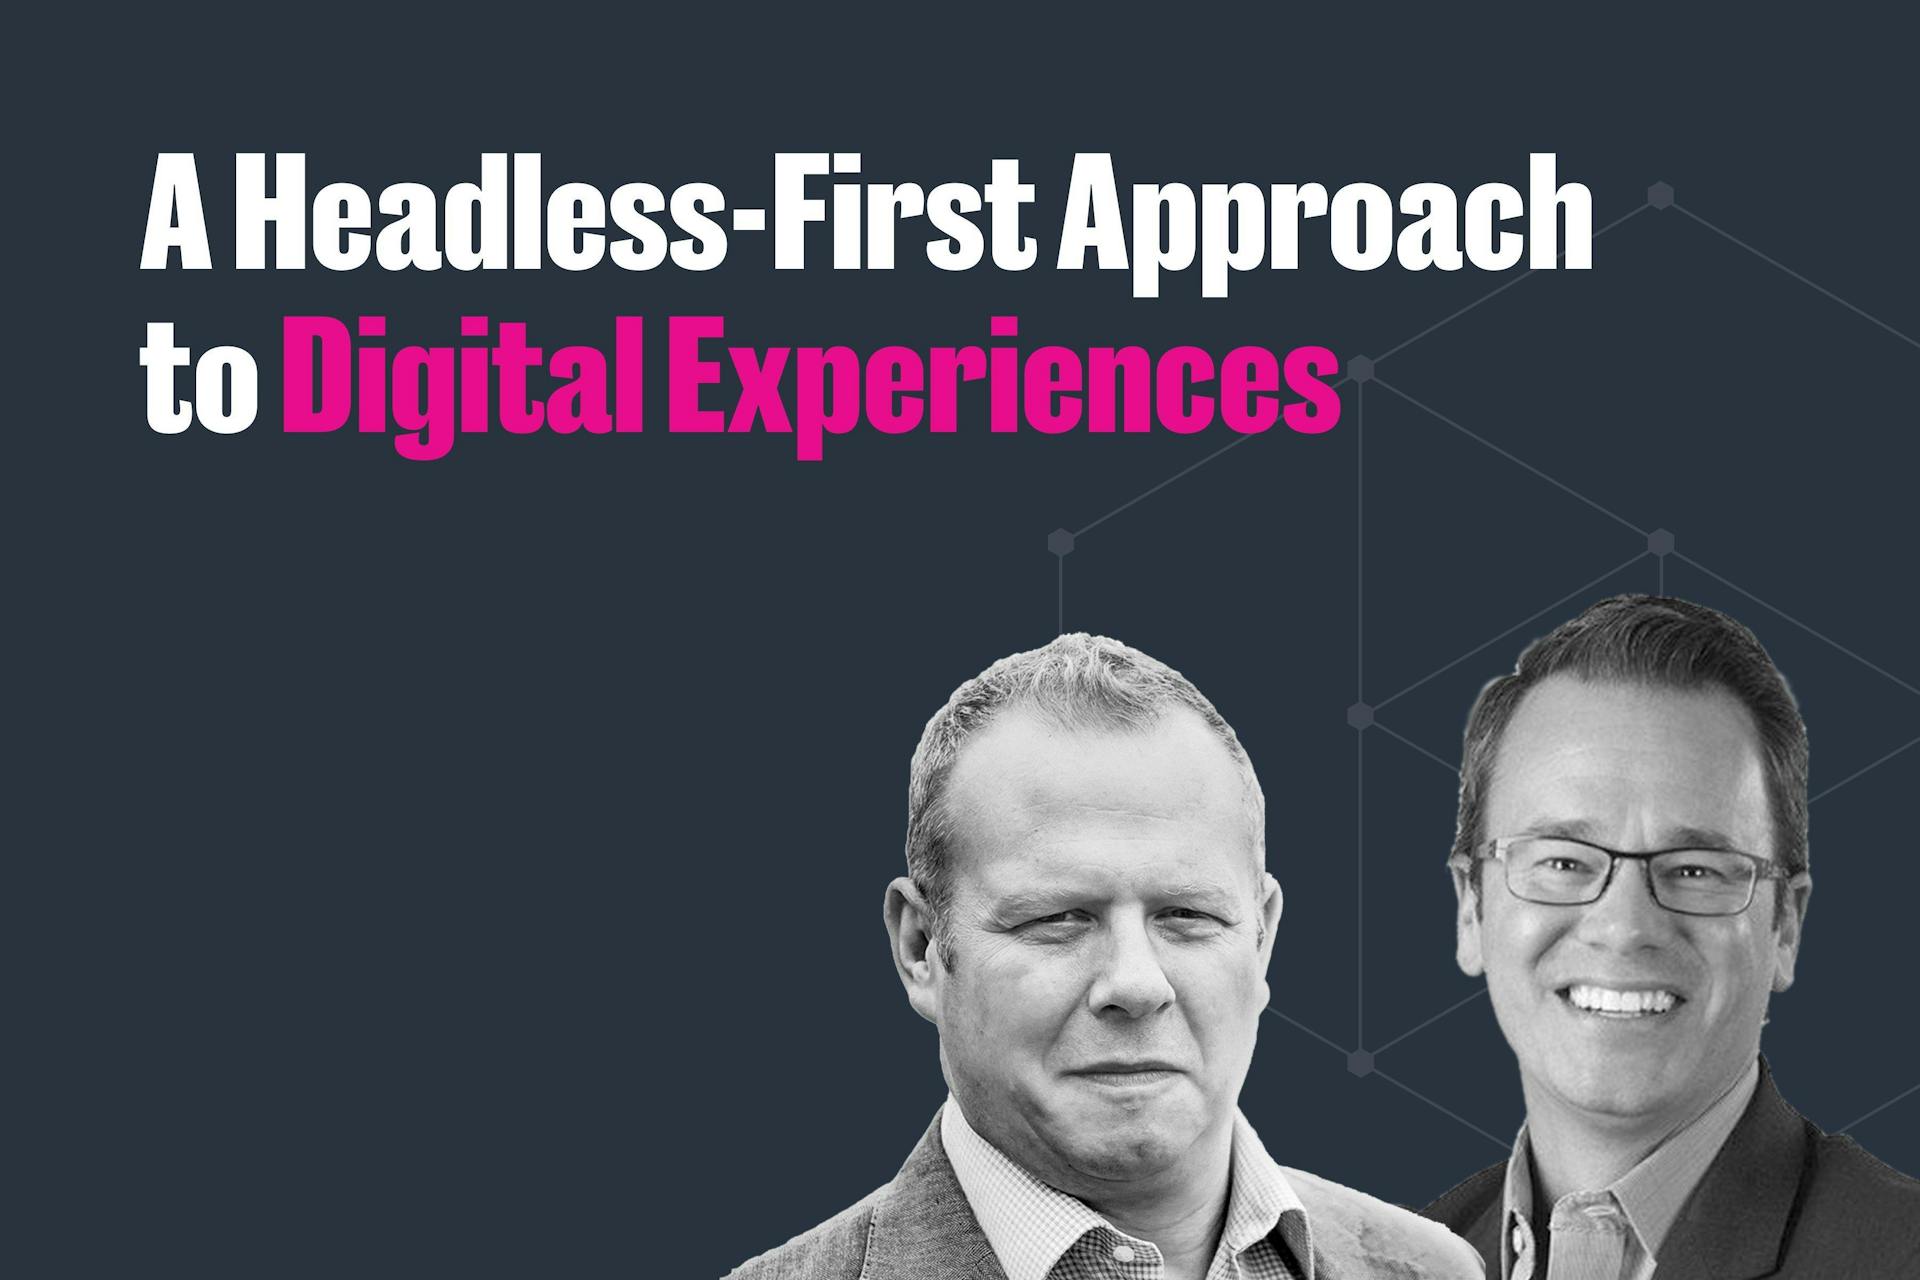 Power Future Growth With A Headless-First Approach to Digital Experiences webinar